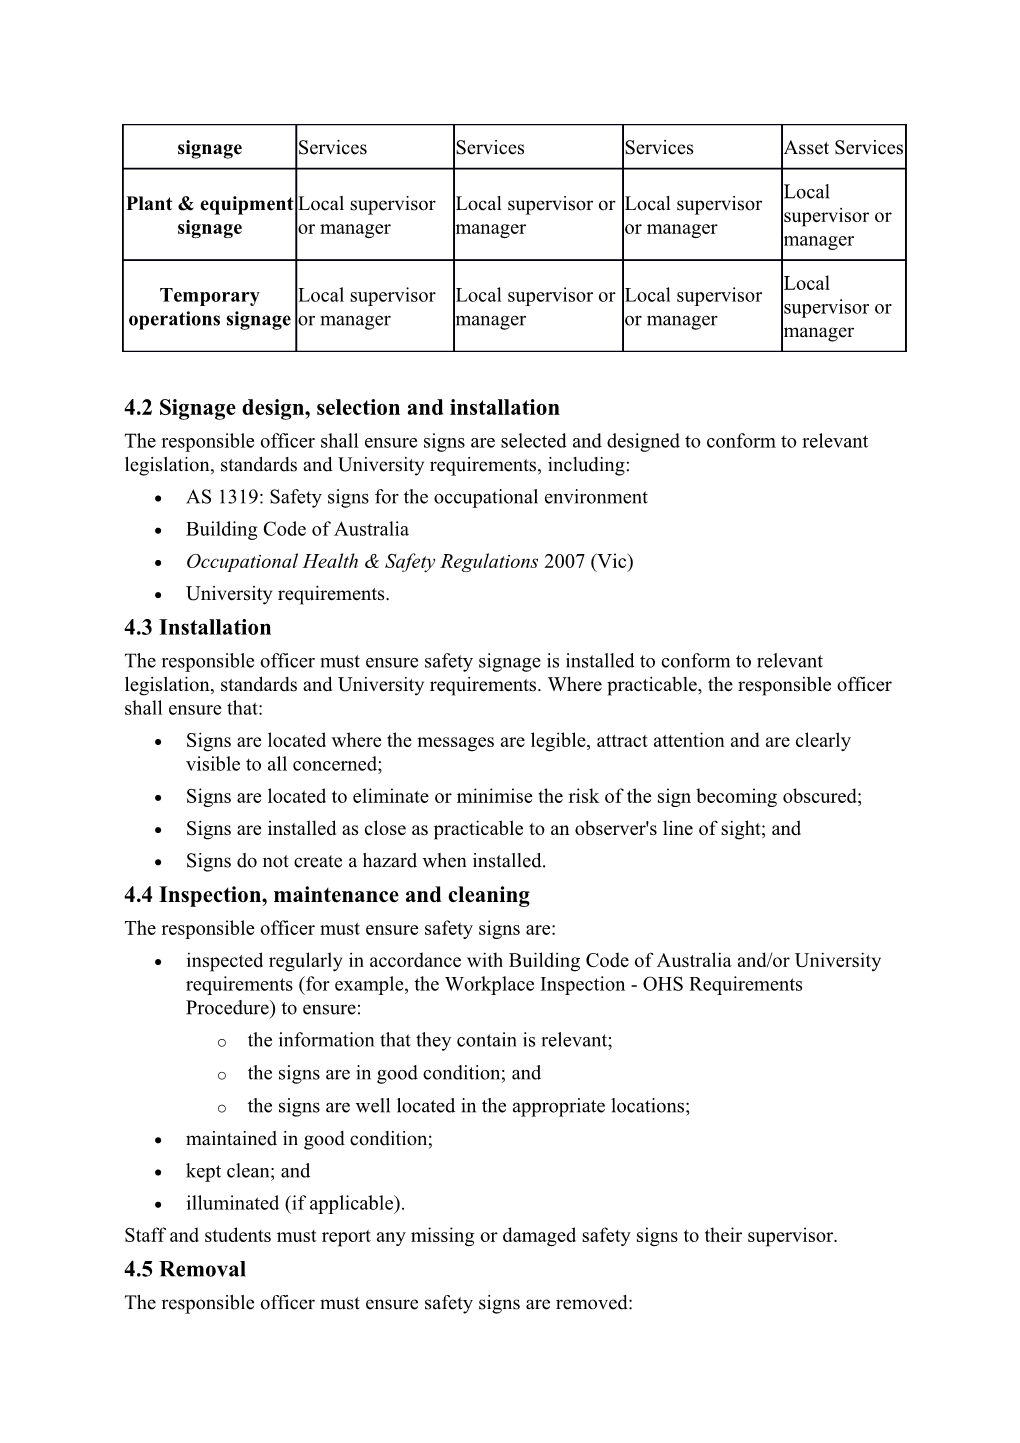 Signage OHS Requirements Procedure